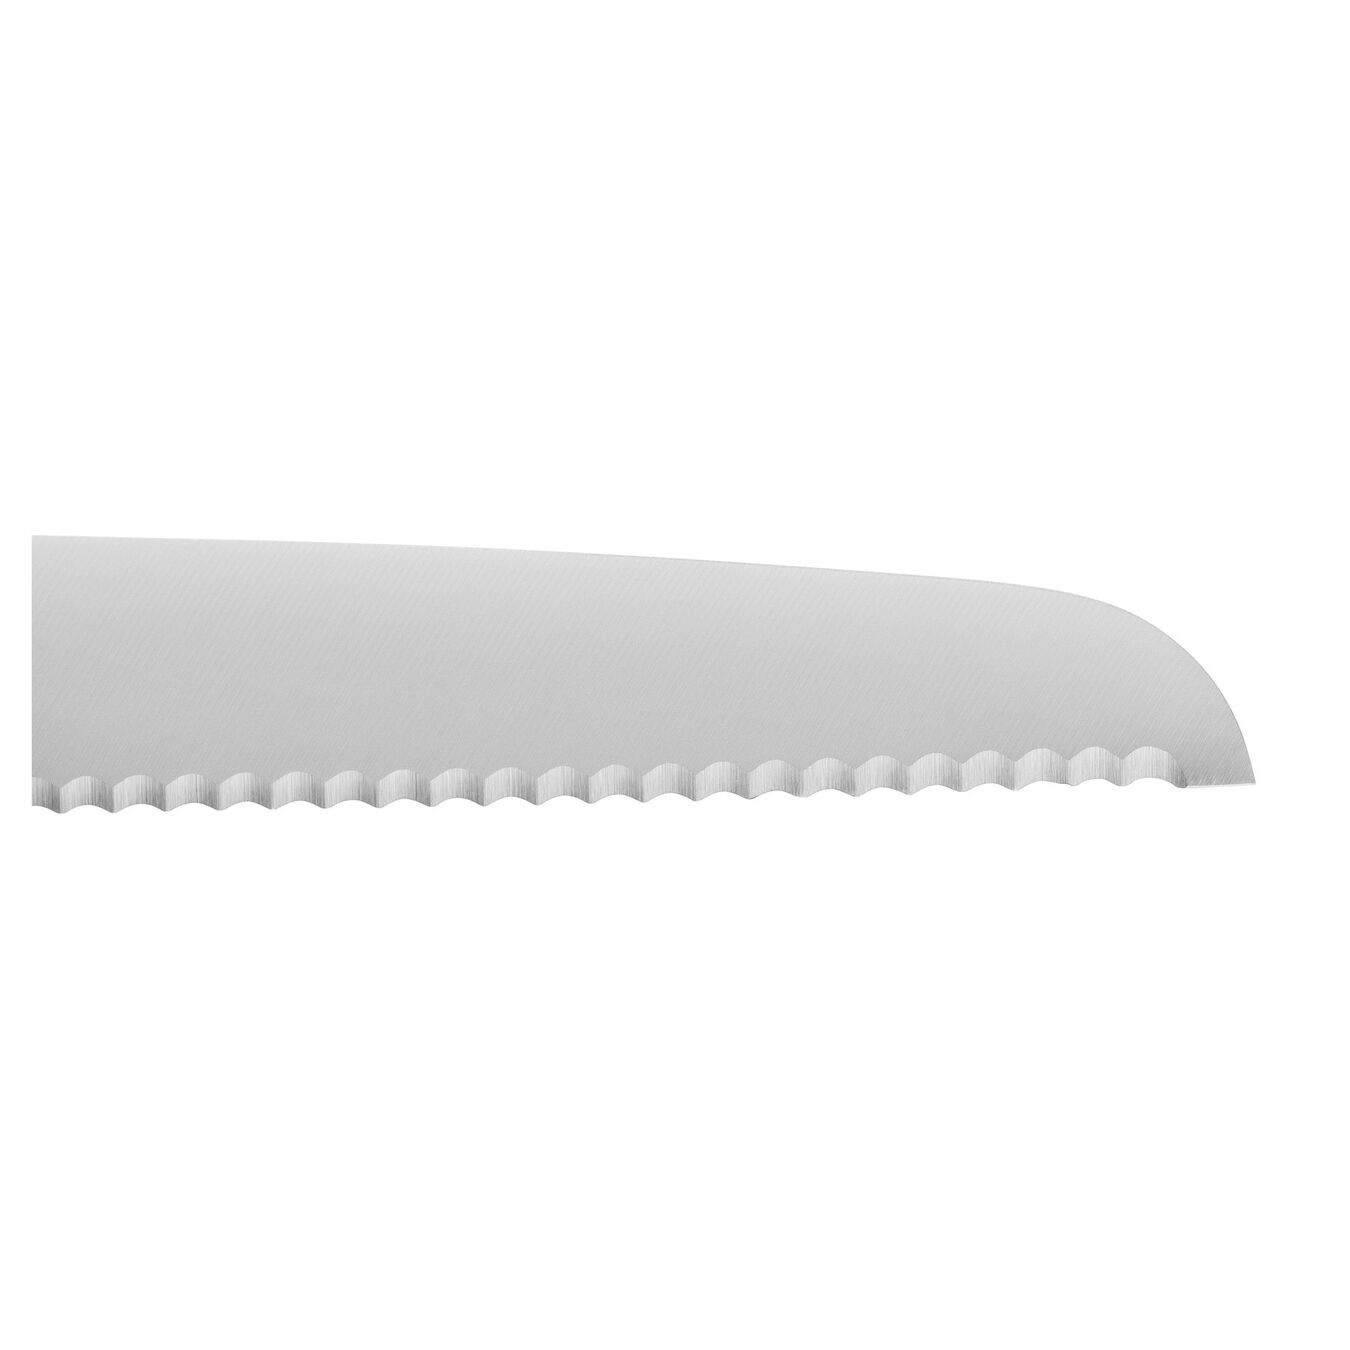 8 inch Bread knife - Visual Imperfections,,large 3